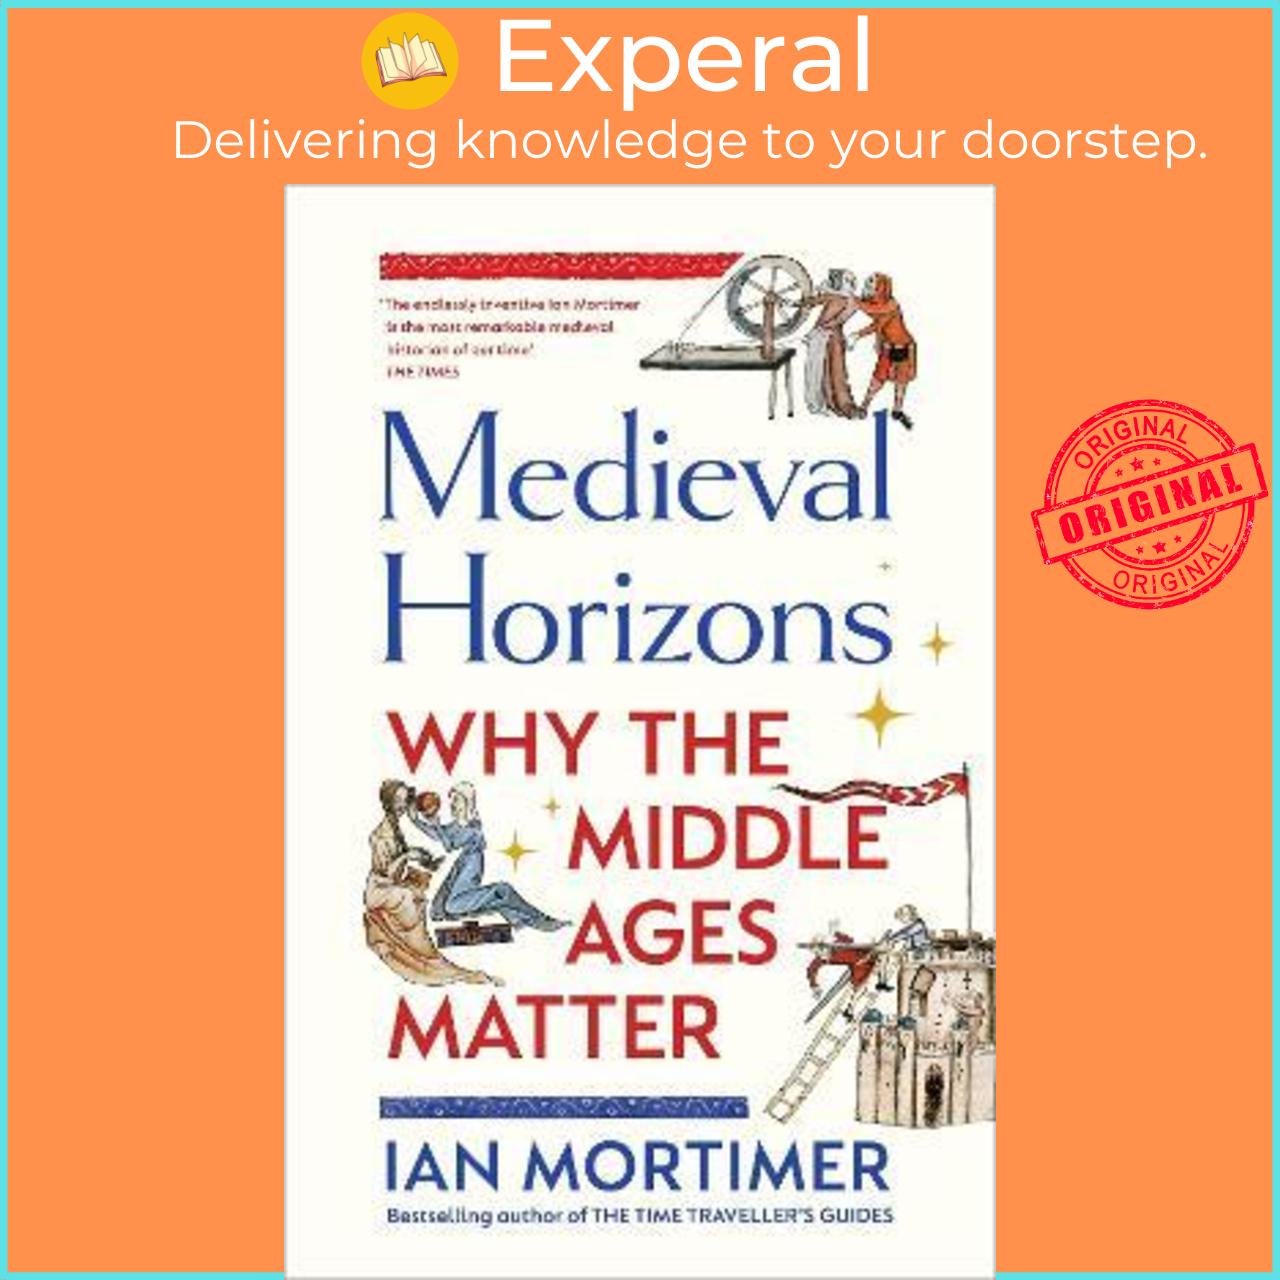 Sách - Medieval Horizons : Why the Middle Ages Matter by Ian Mortimer (UK edition, hardcover)